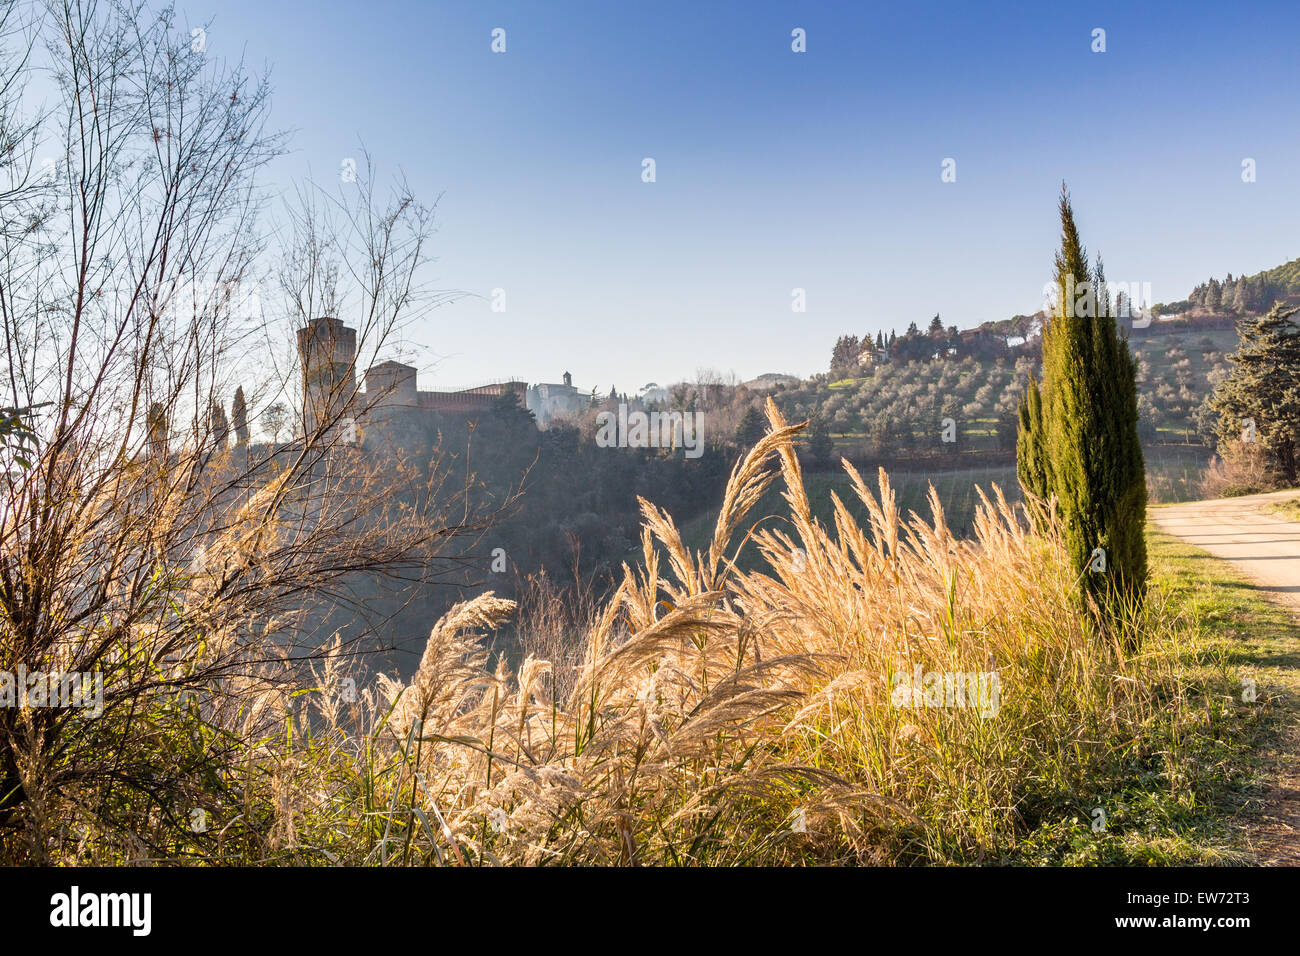 The brick walls of a medieval fortress and a sanctuary with steeple devoted to Blessed Virgin Mary on misty hills in a countryside of bushes and cypress trees from bulwark in a winter sunny day Stock Photo